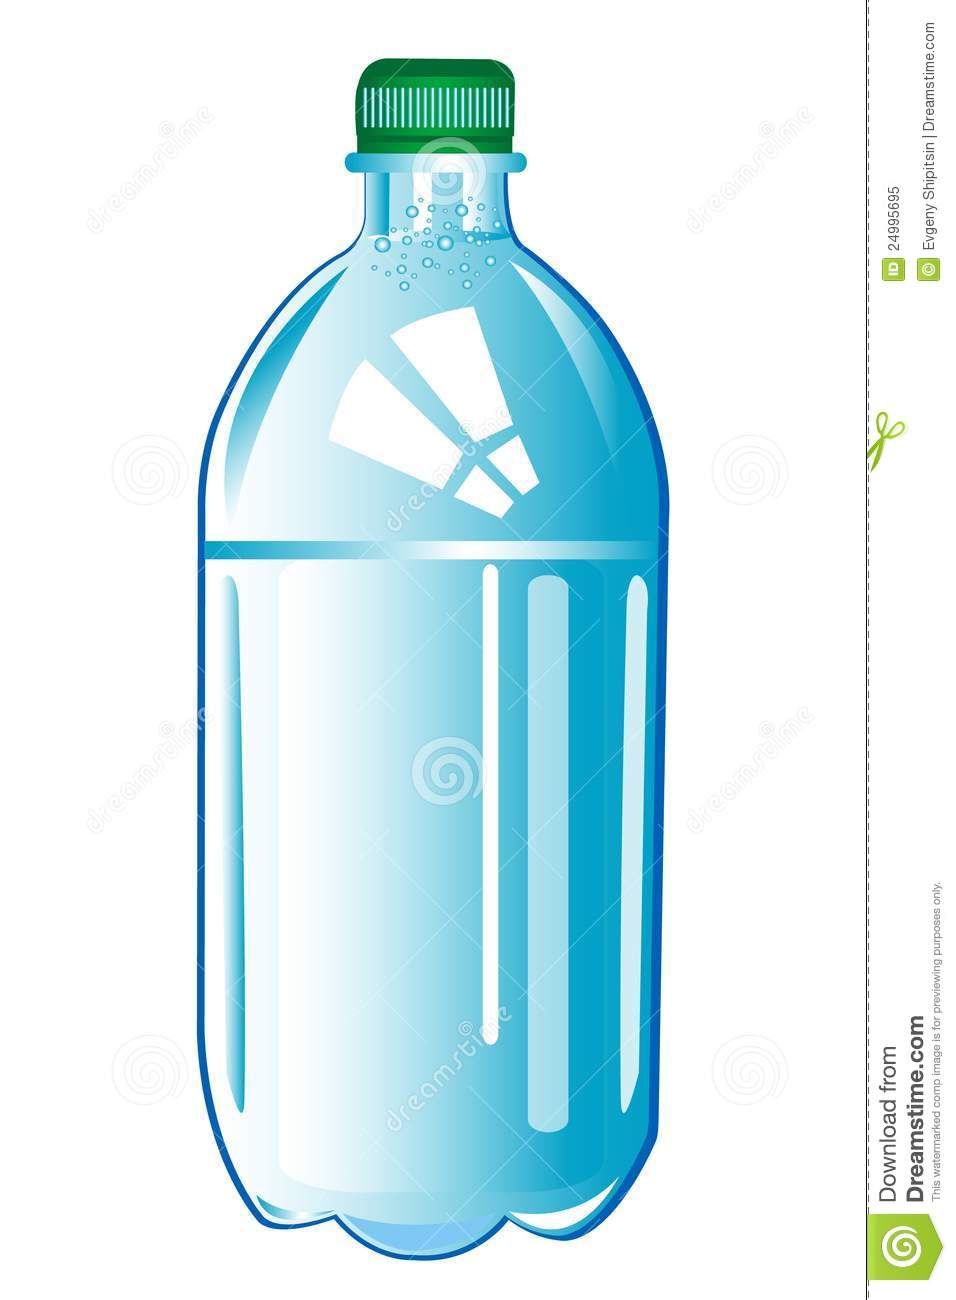 Plastic Bottle With Water Royalty Free Stock Photo   Image  24995695